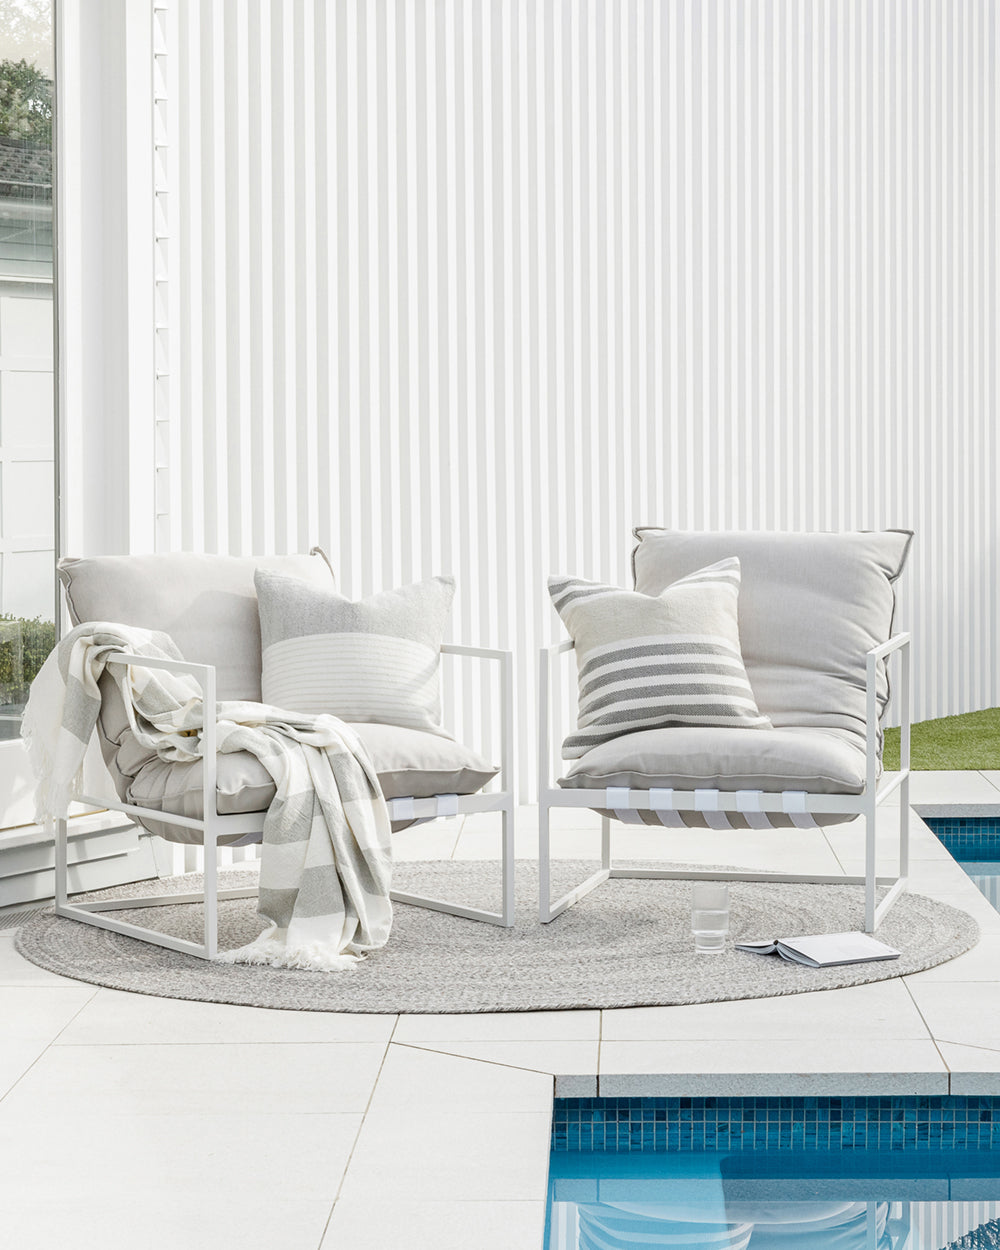 Willett outdoor cushion on patio chairs around a pool on white porcelain tiles